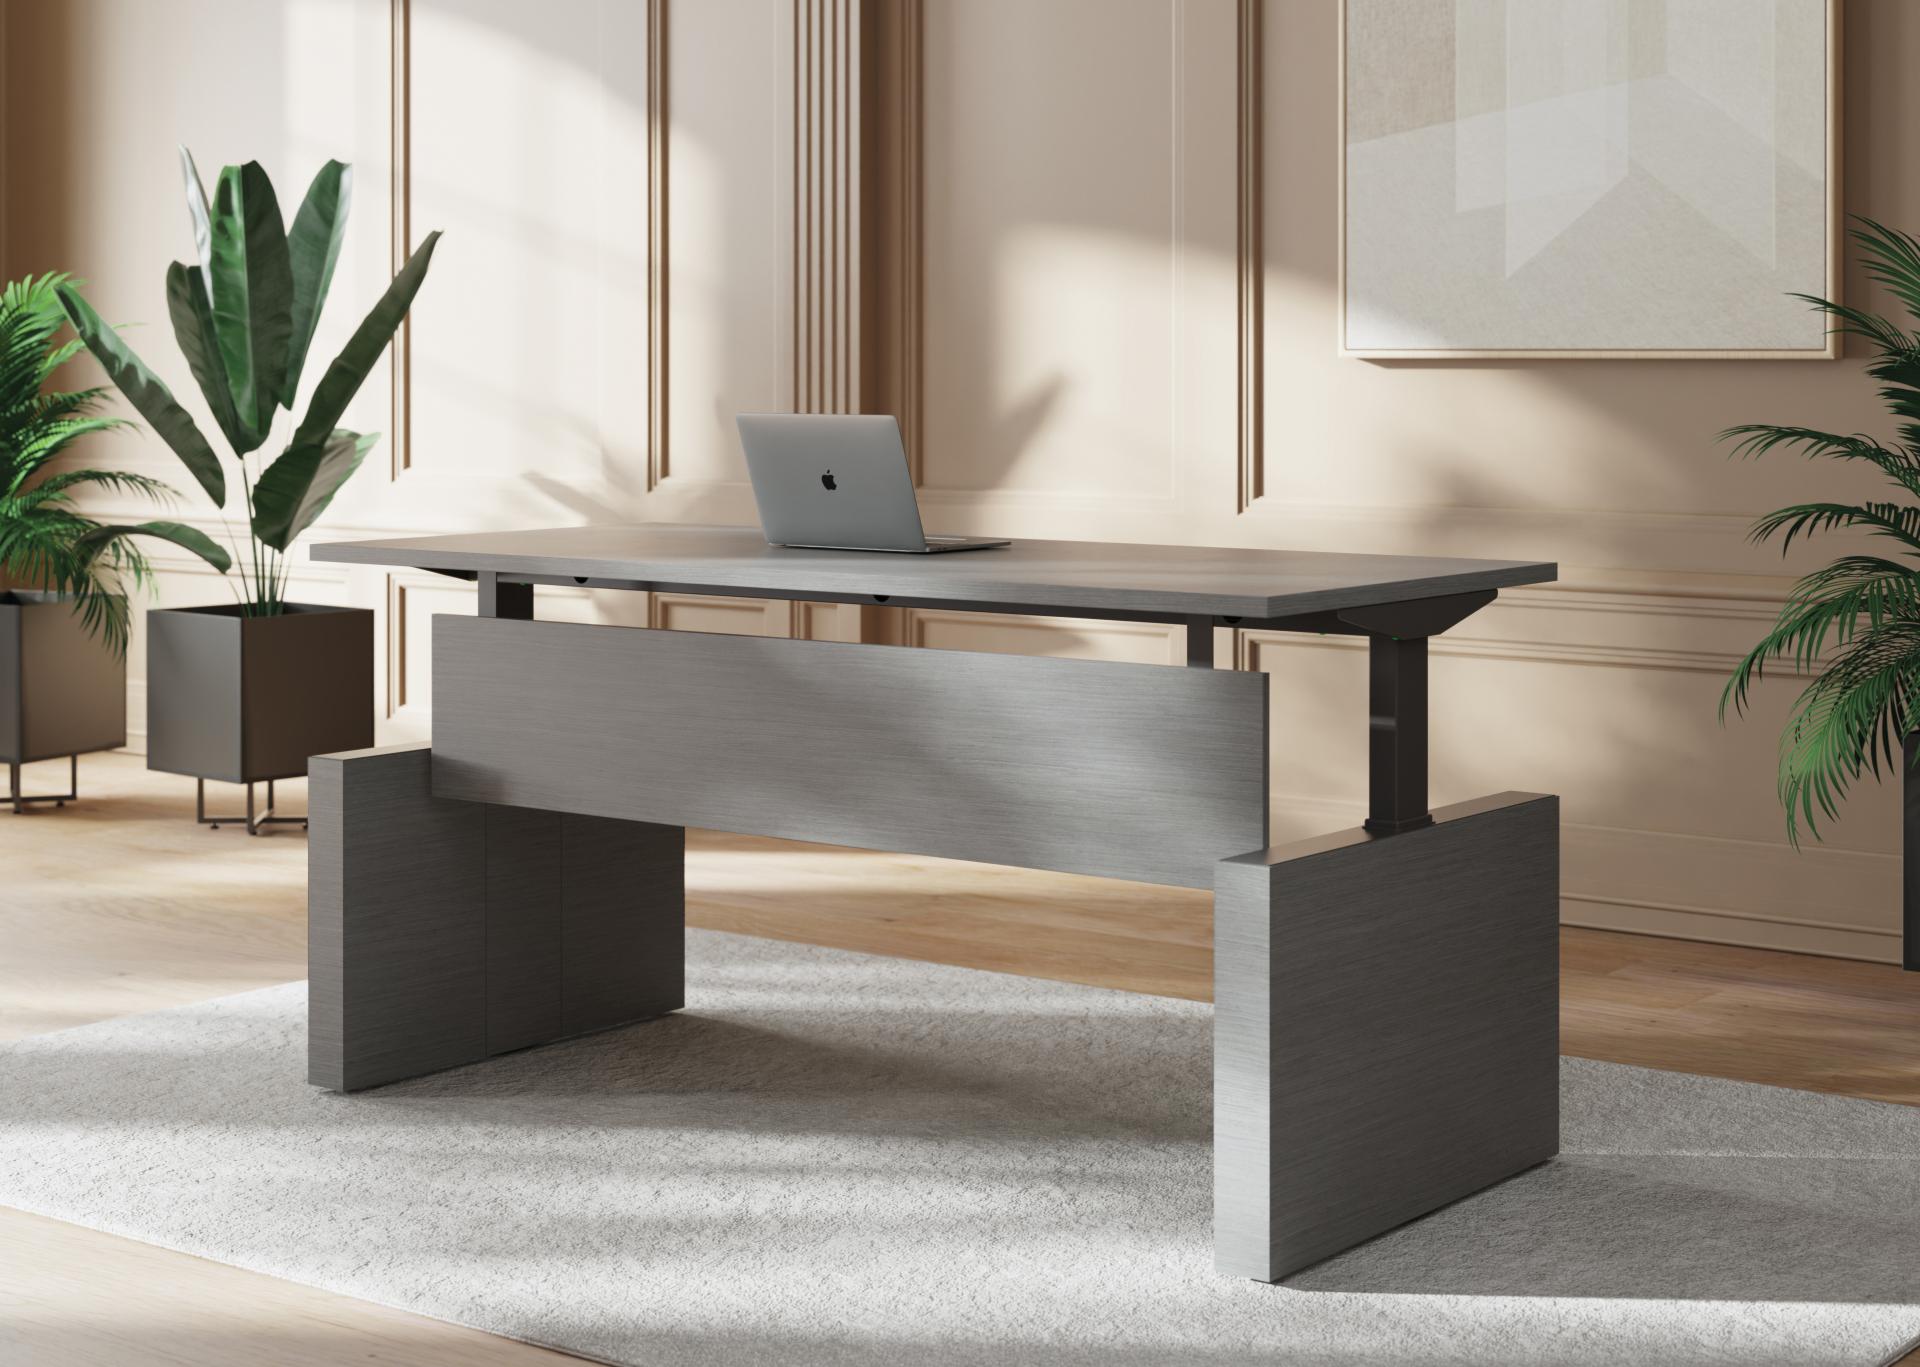 Elevate Your Workspace with Standing Tables!